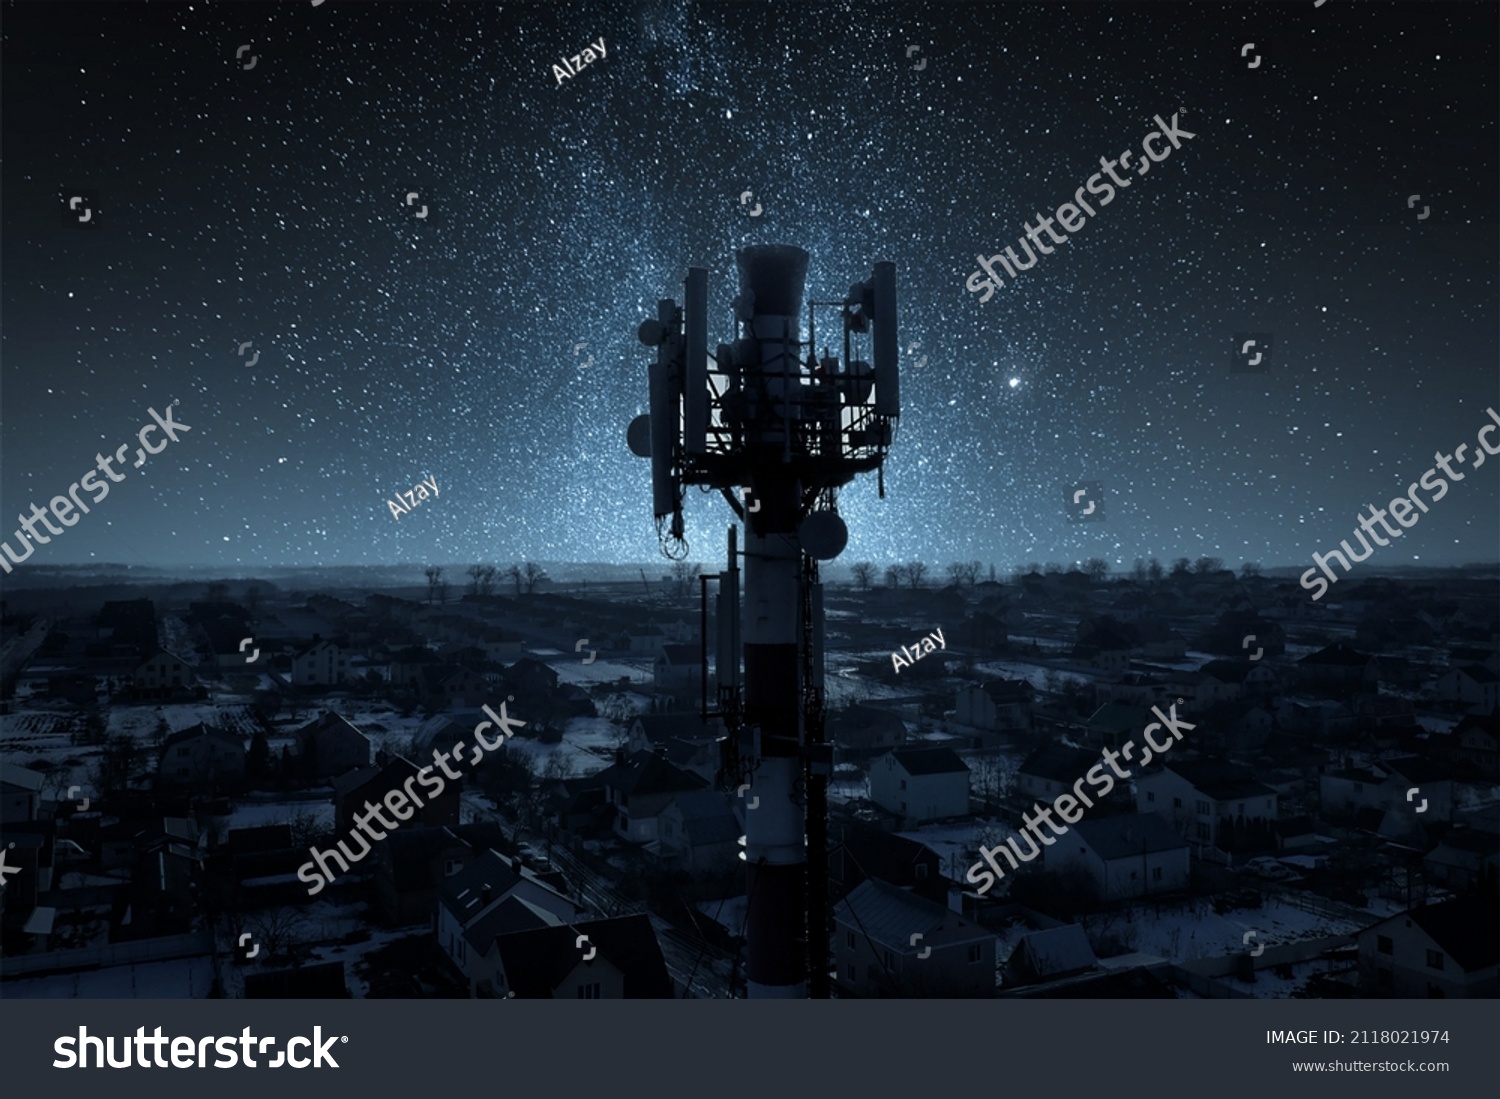 Telecommunication tower of 4G and 5G cellular. Base Station or Base Transceiver Station. Wireless Communication Antenna Transmitter. Telecommunication tower with antennas against blue sky. #2118021974